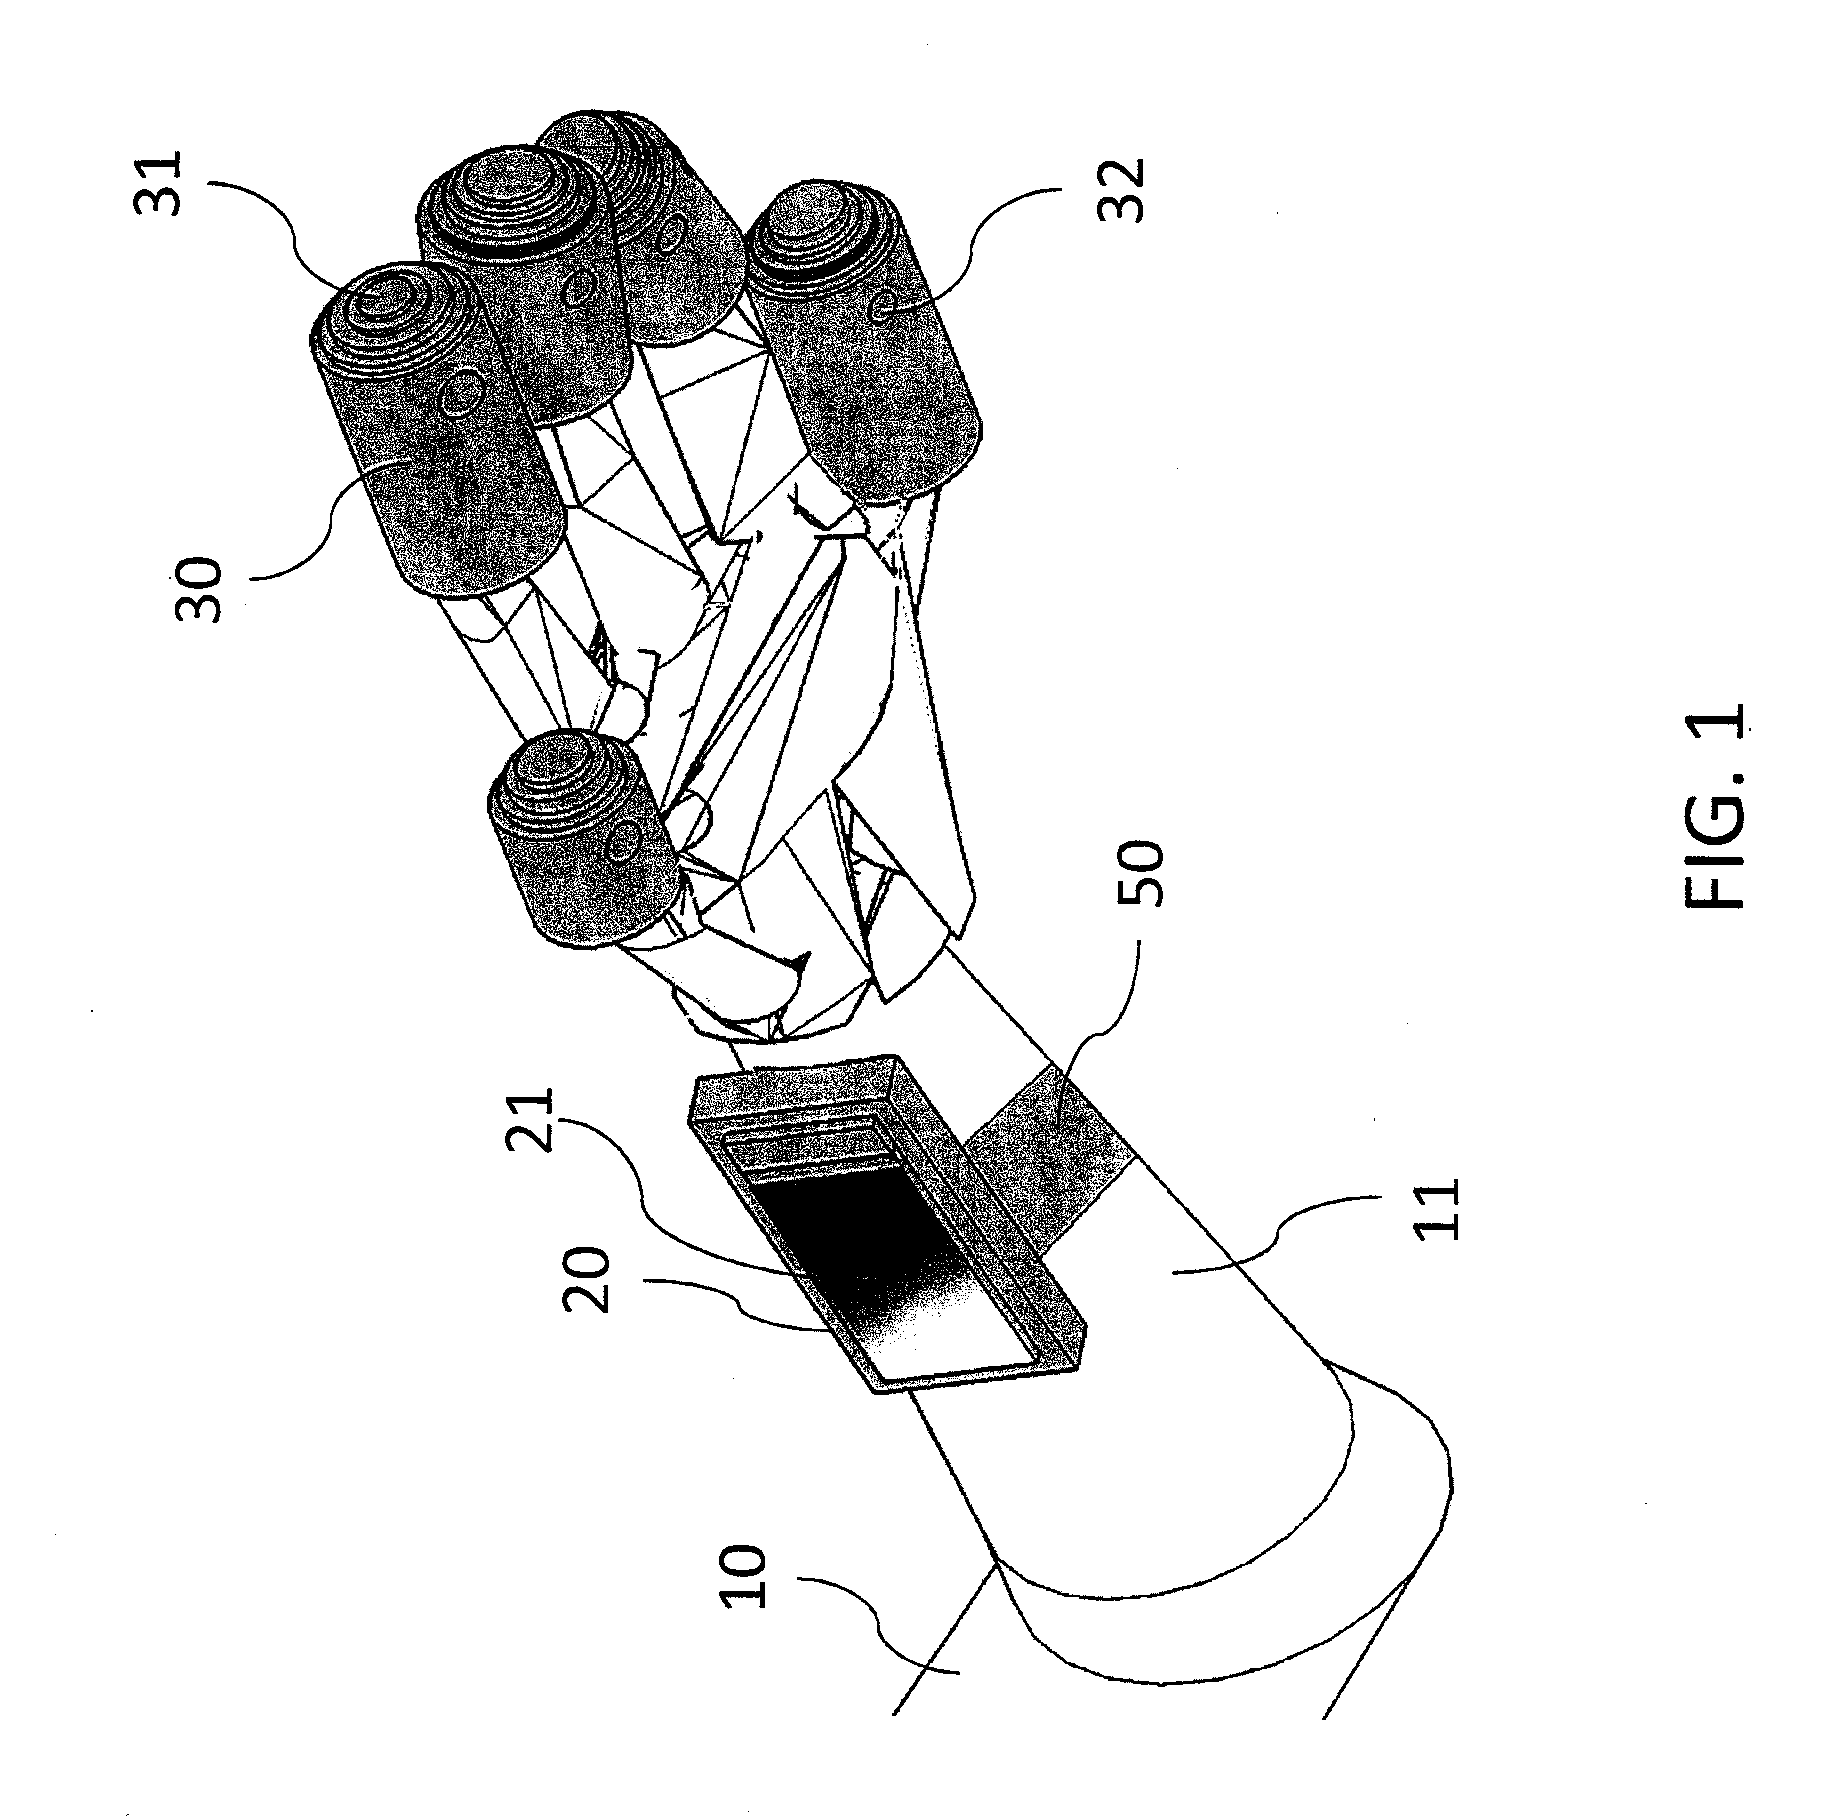 System and method for providing a prosthetic device with non-tactile sensory feedback